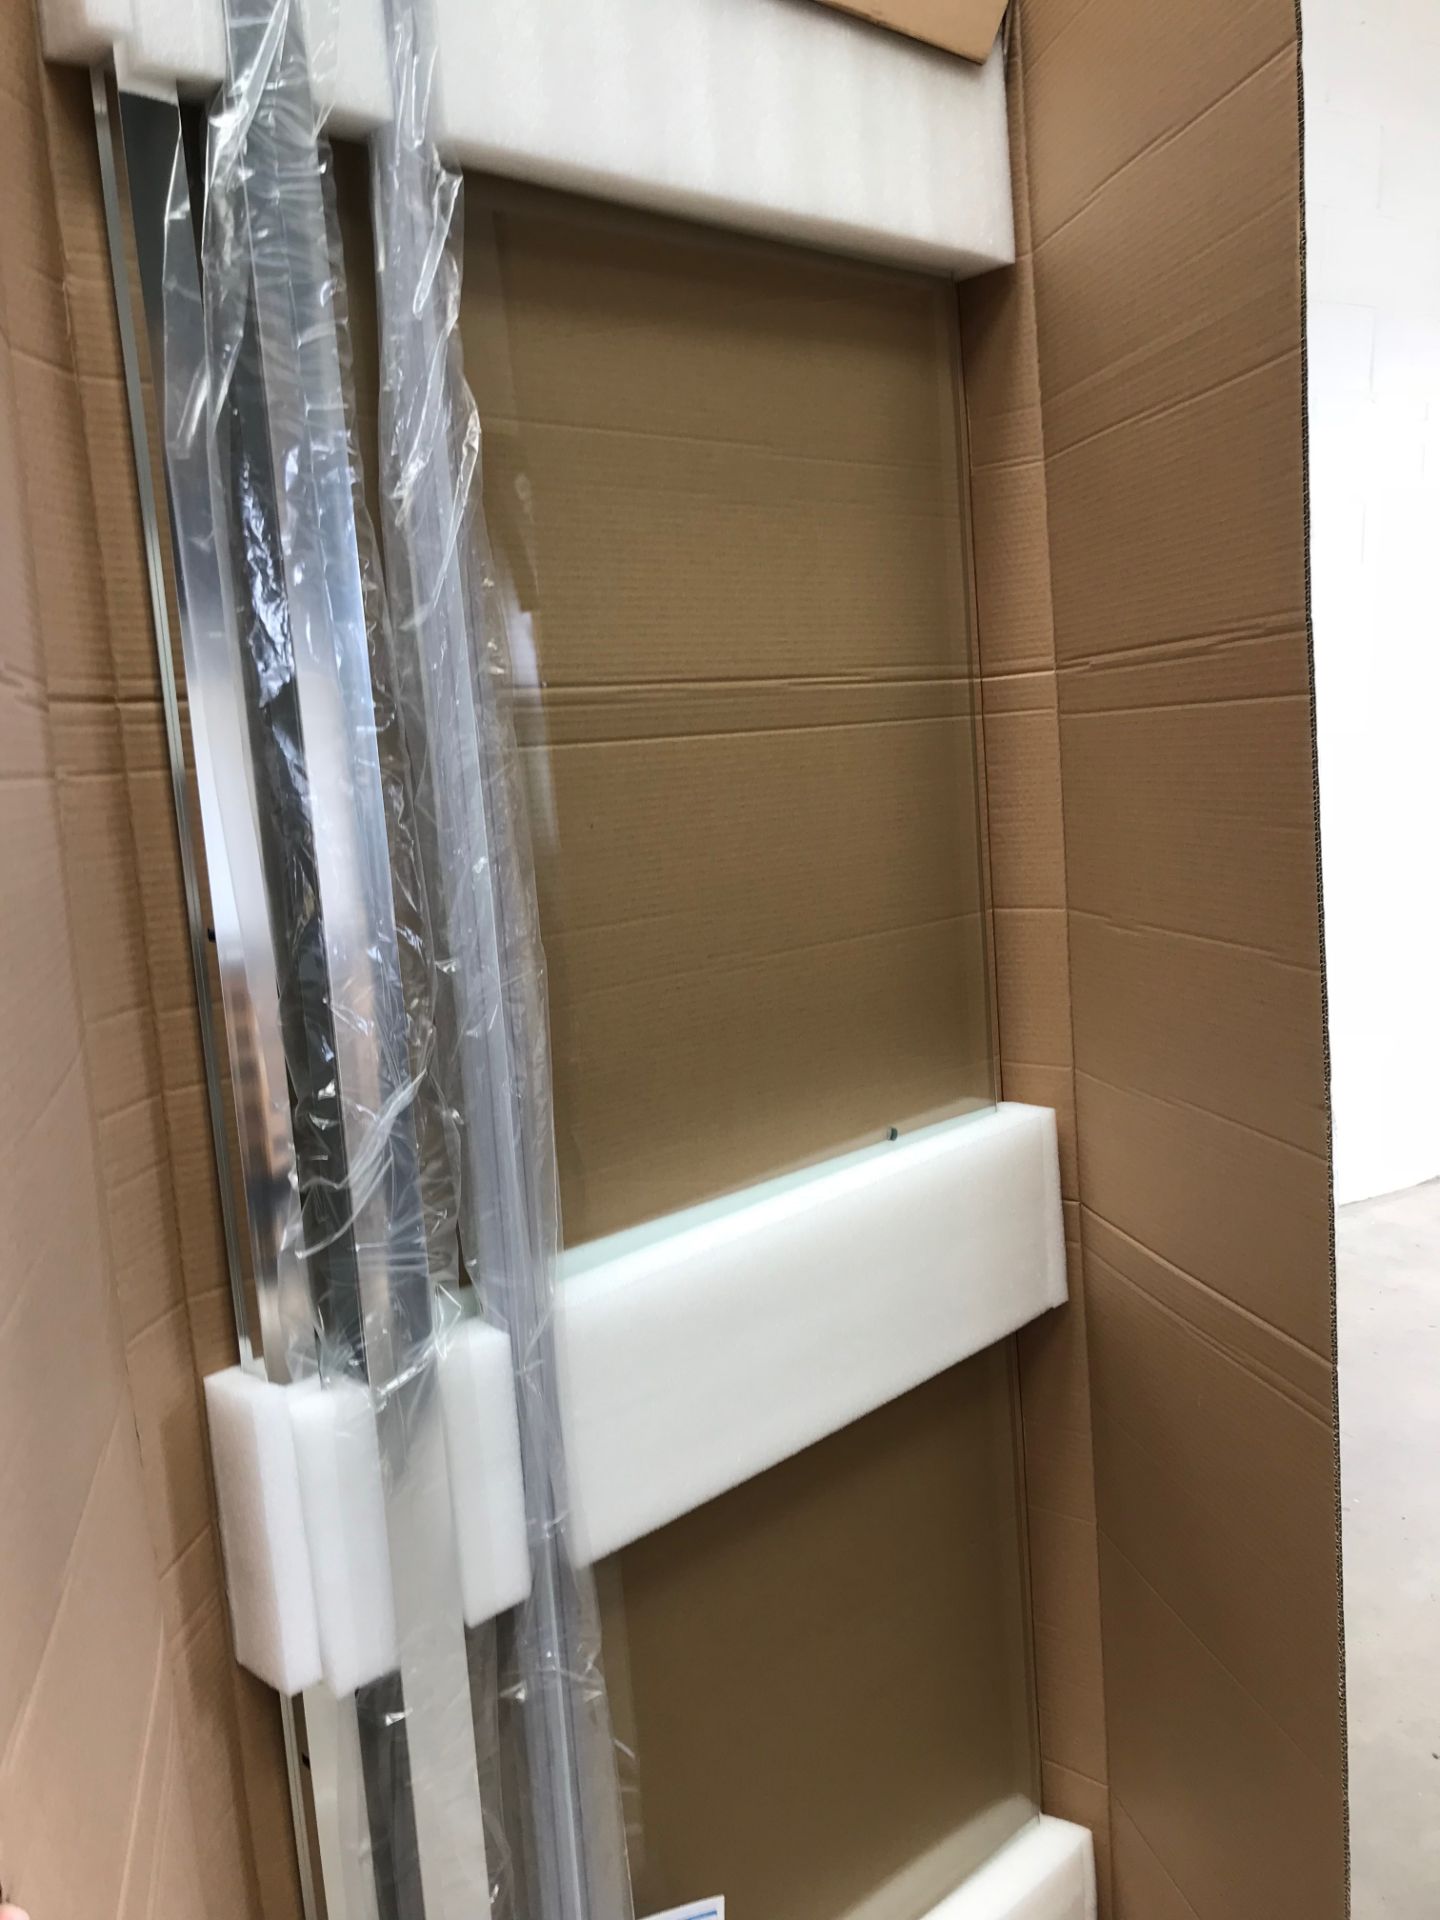 857-10 | 10 x SHOWER ENCLOSURE HINGE 900X900MM PIVOT C RRP of Pallet - £2839.9 Delivery charged - Image 2 of 6